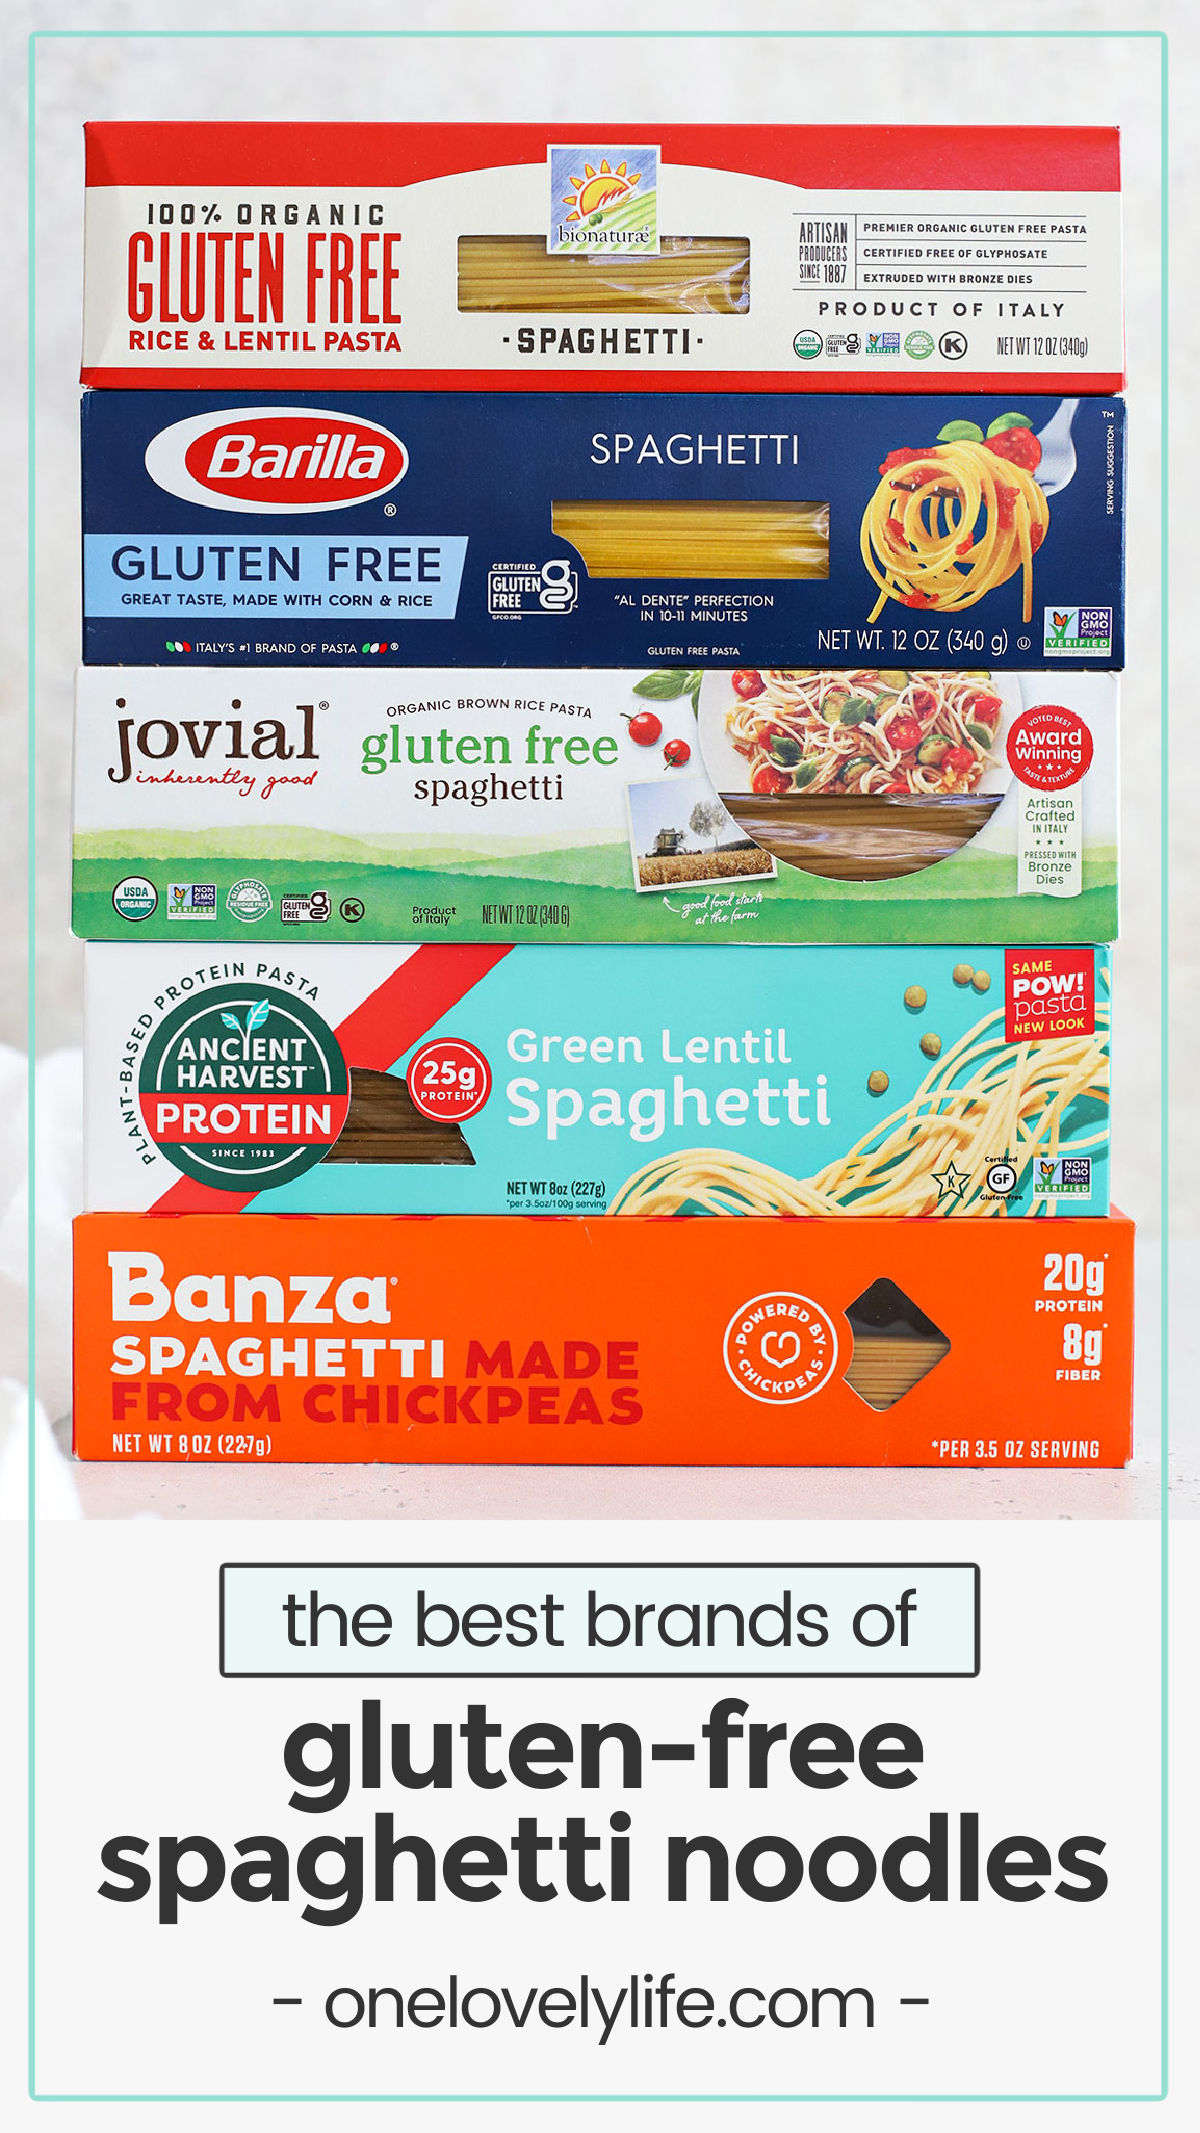 Wondering which brands of spaghetti noodles are gluten-free? We're sharing 5 popular brands, plus which gluten-free spaghetti is the best! / gluten free spaghetti brands / the best gluten free spaghetti / gluten free spaghetti pasta brands / gluten free spaghetti noodles brands / best gluten free spaghetti options / best gluten free pasta